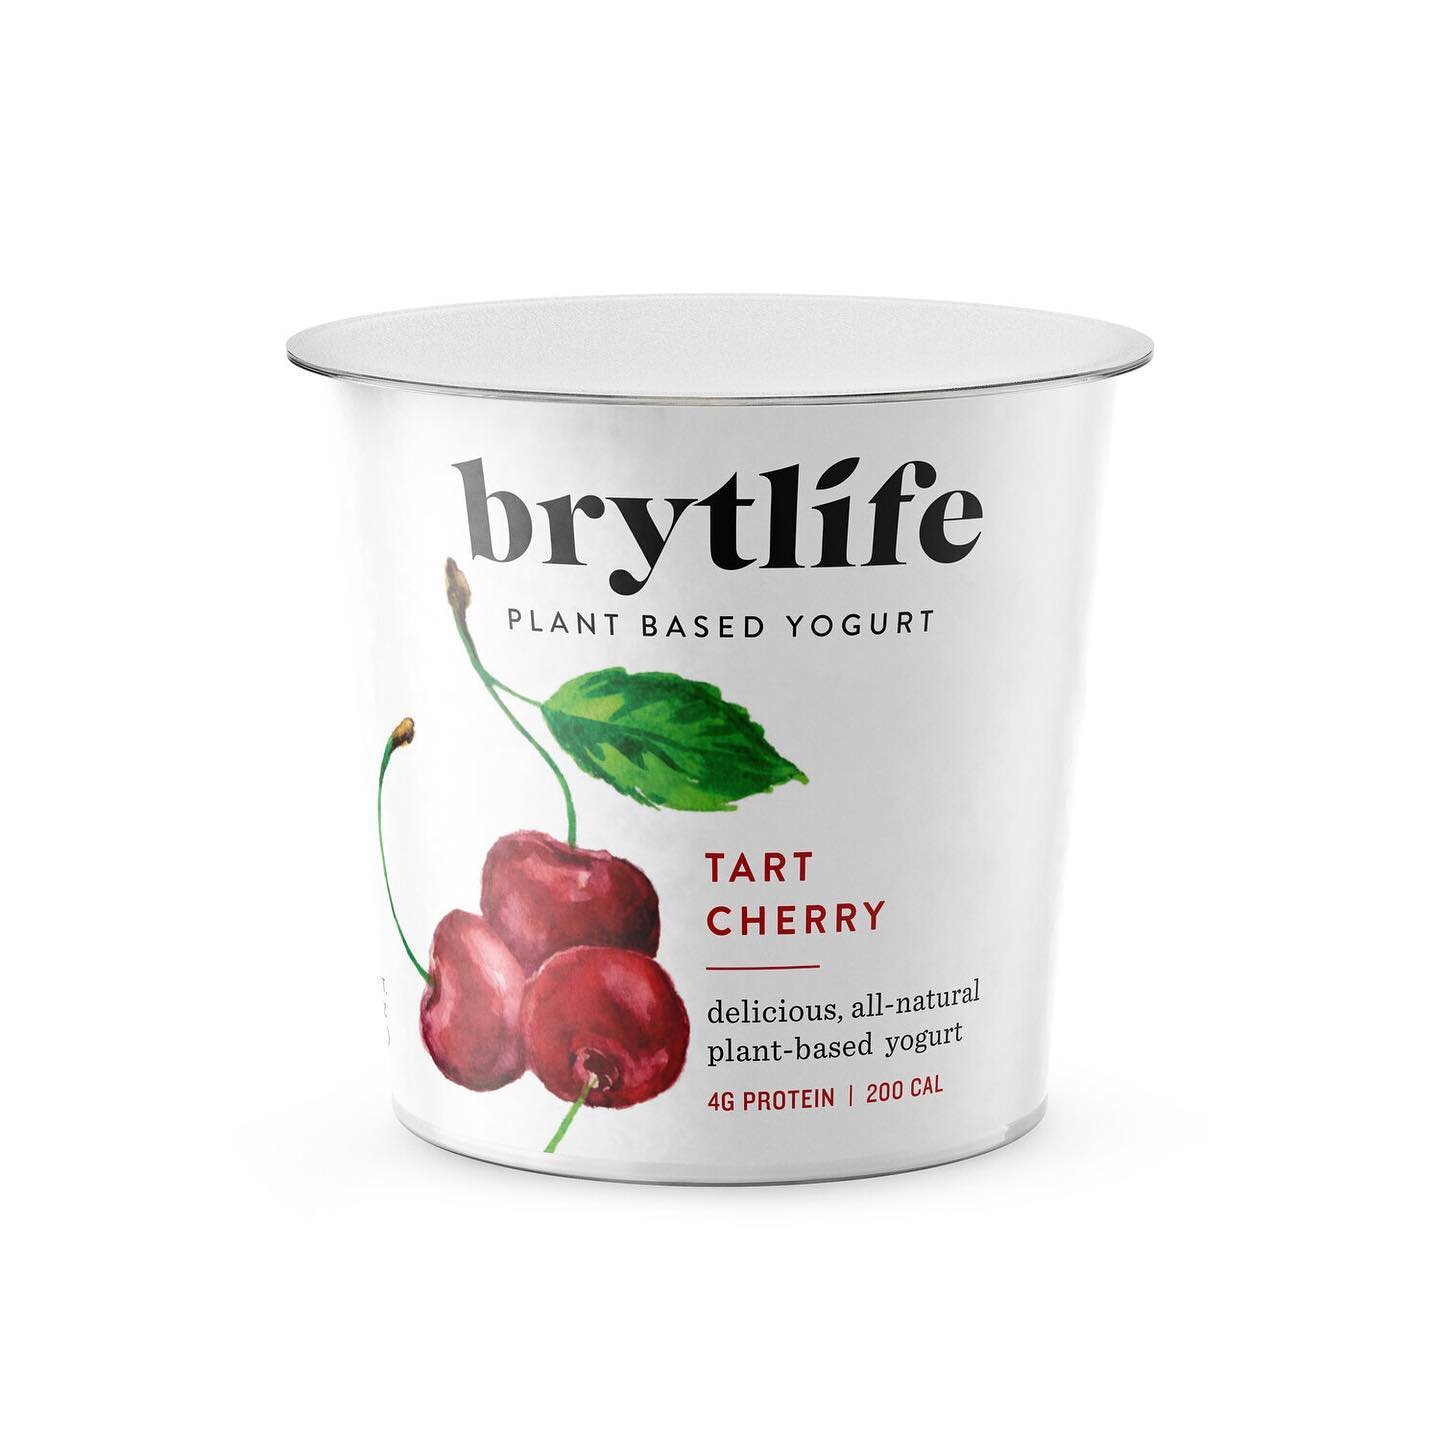 Diary Free, Vegan Yogurt sustainably created with superfoods like Spirulina, a high protein source of phytonutrients like iron, potassium and B vitamins.